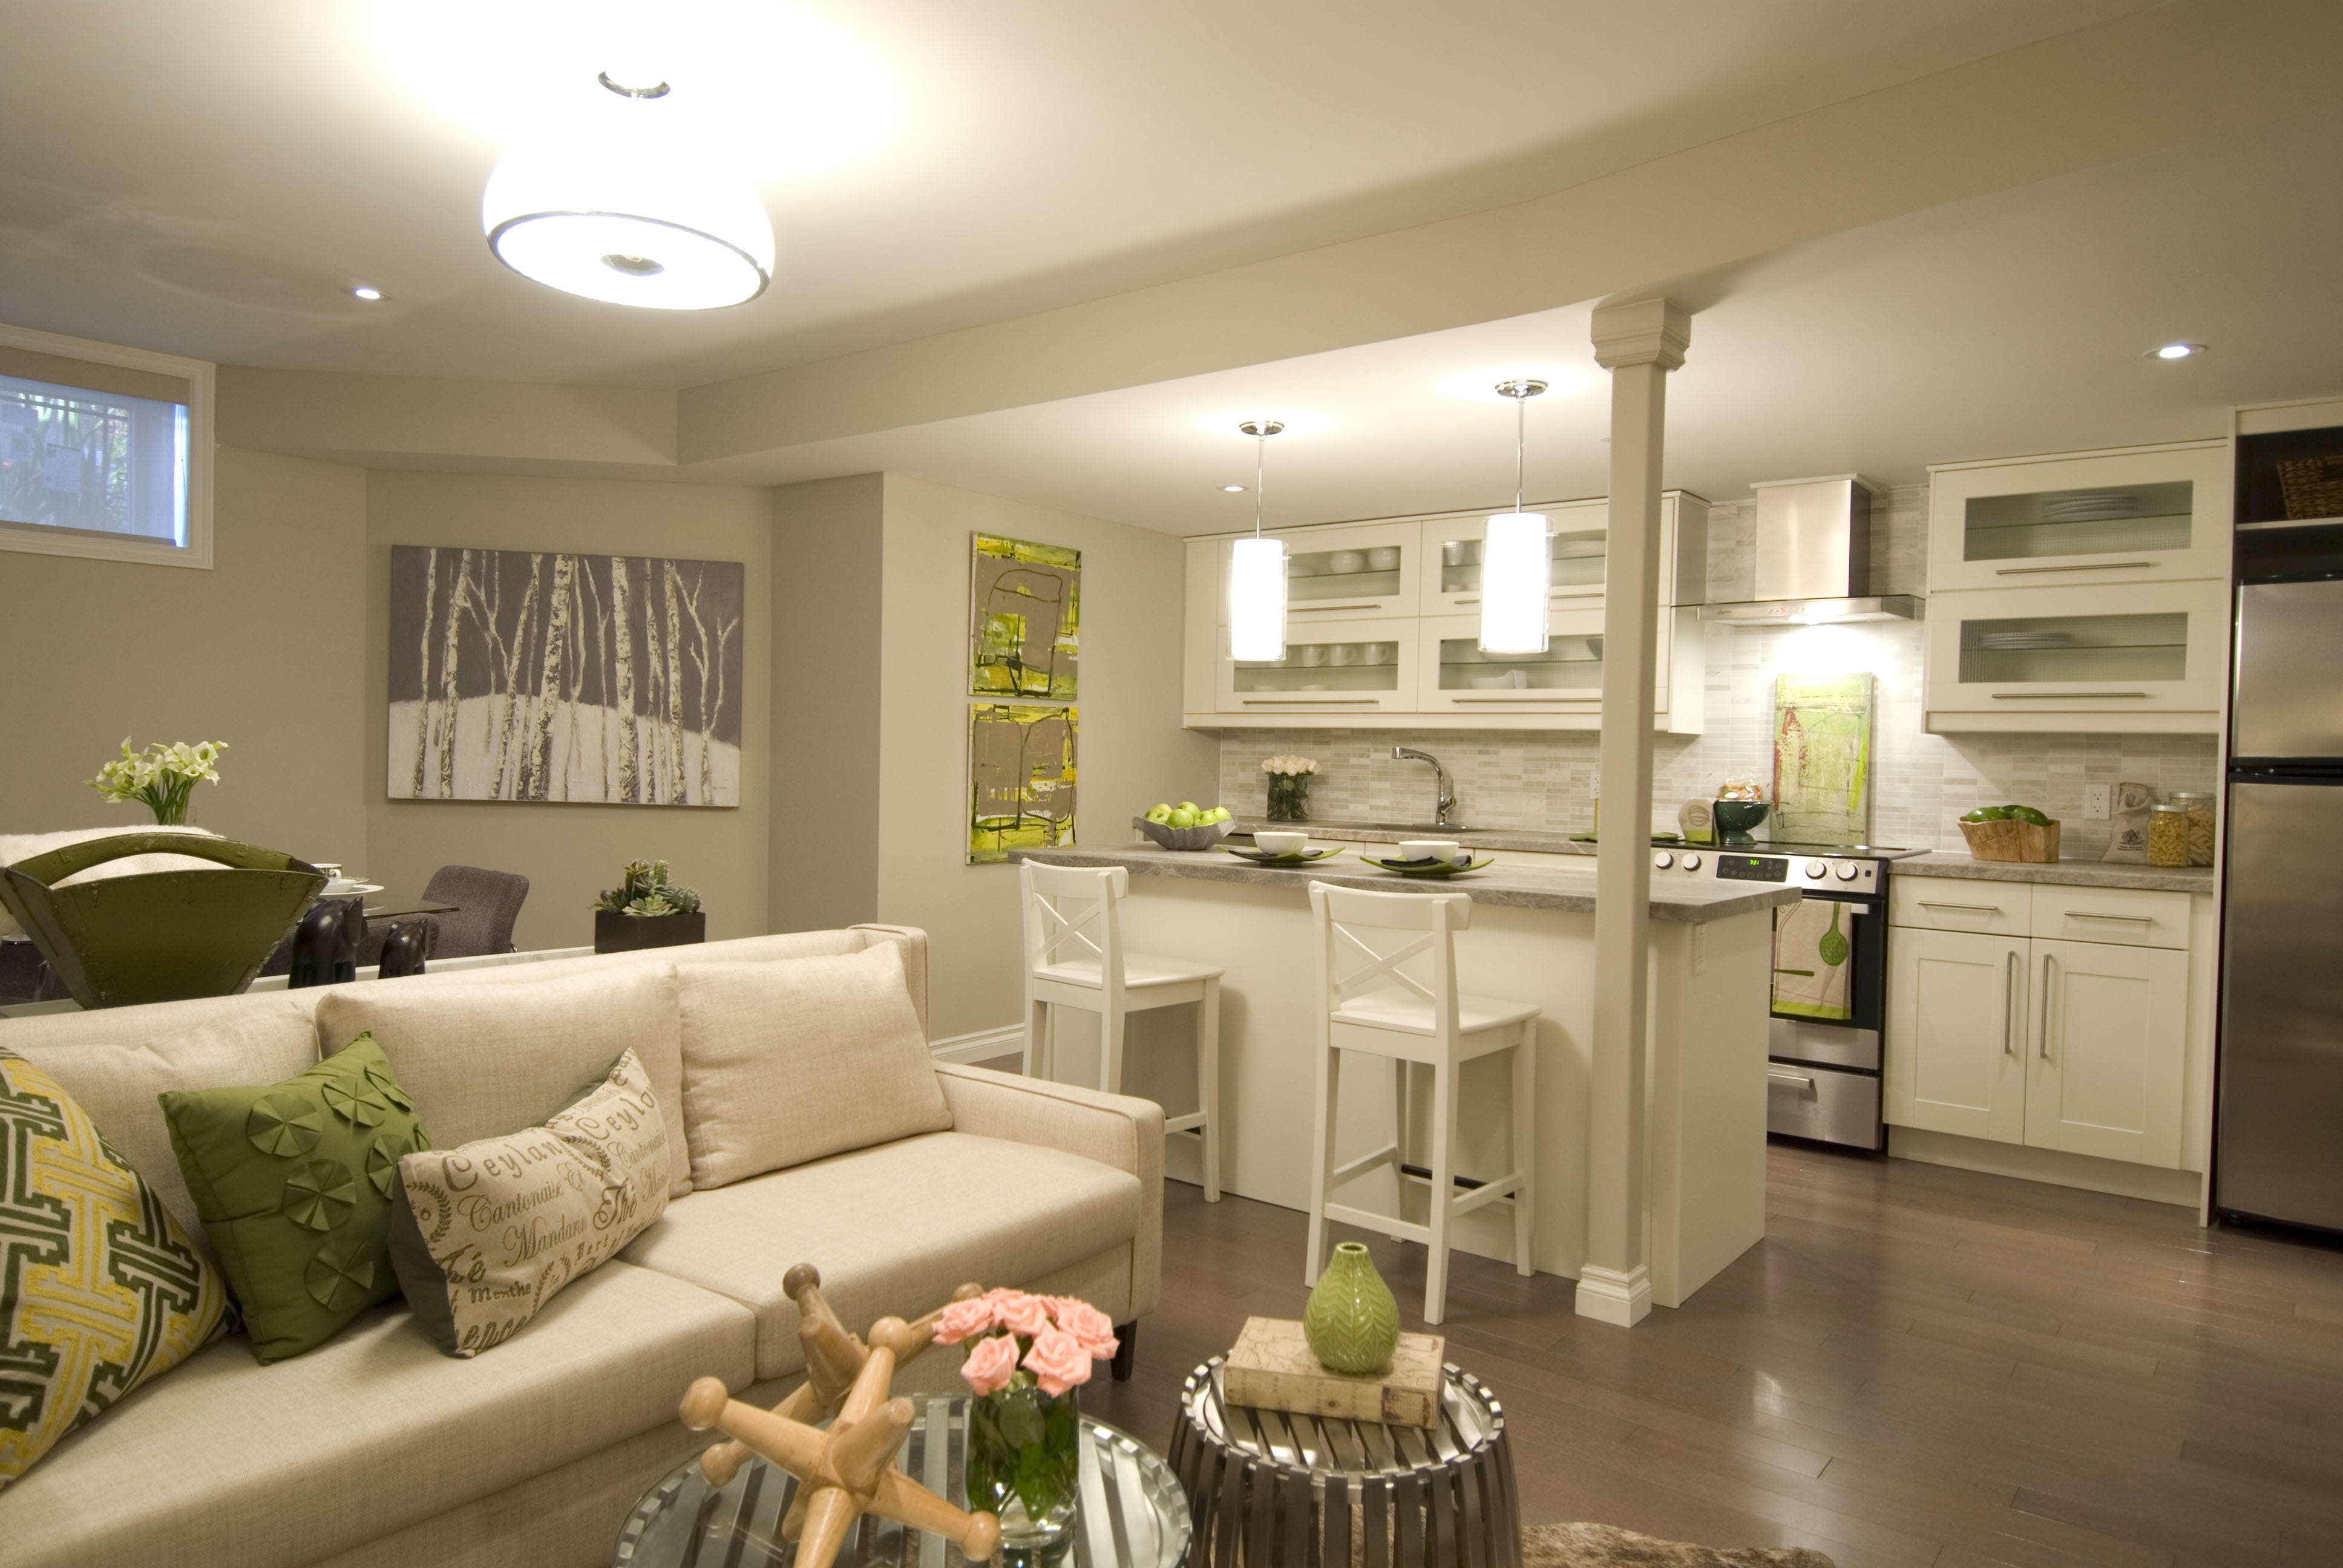 Convert Your Basement into a Bright and Comfortable Space